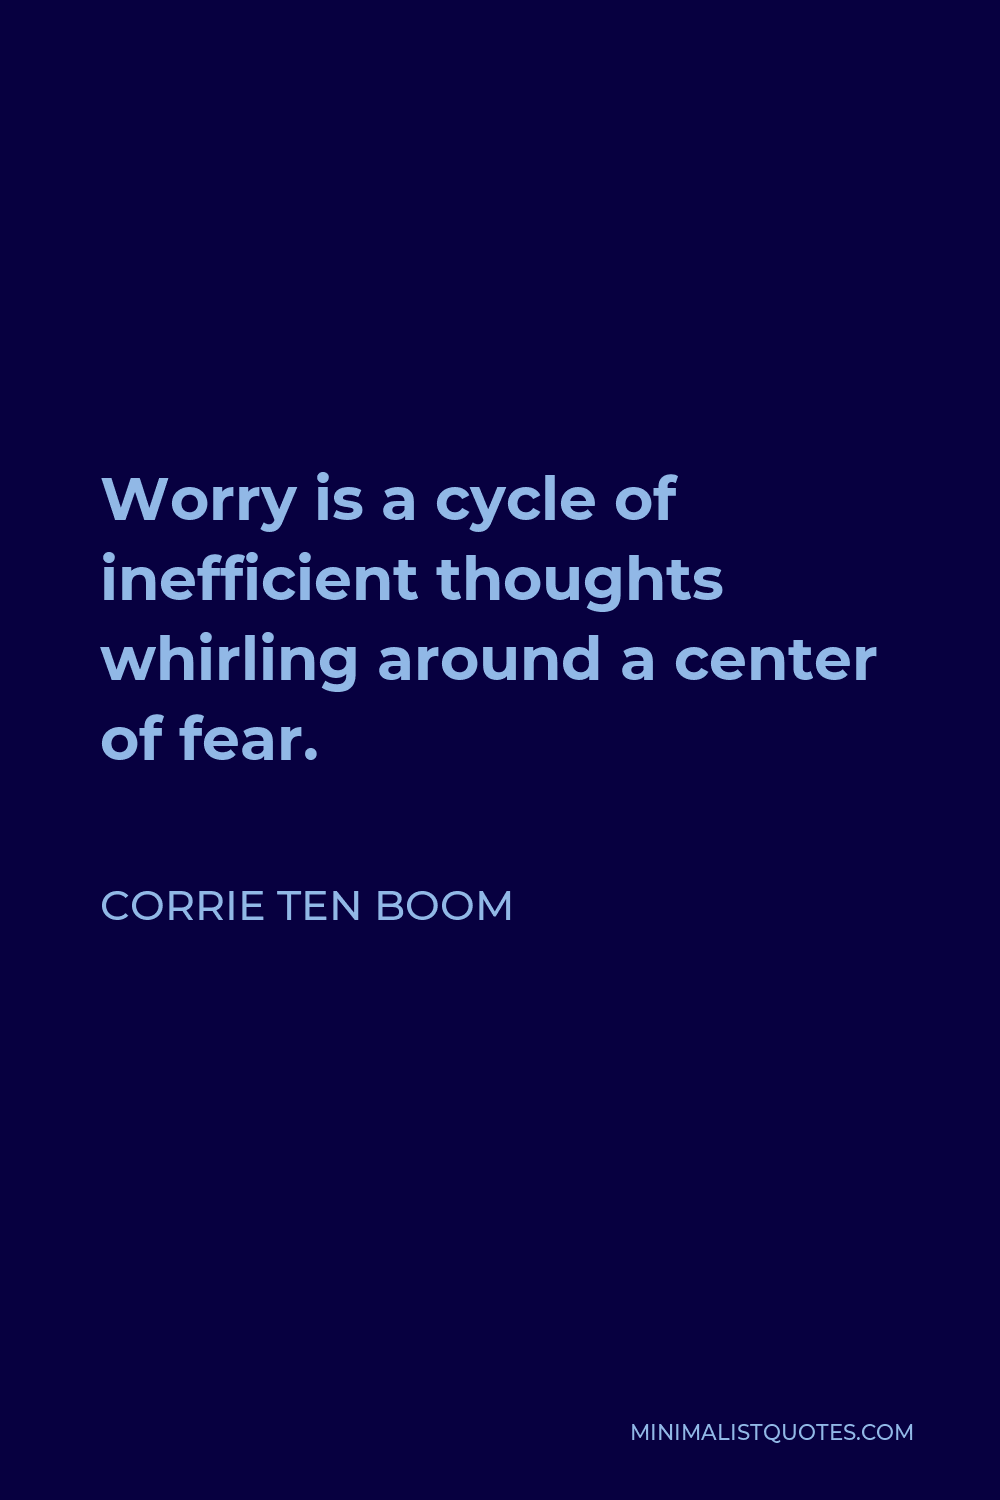 Corrie ten Boom Quote - Worry is a cycle of inefficient thoughts whirling around a center of fear.